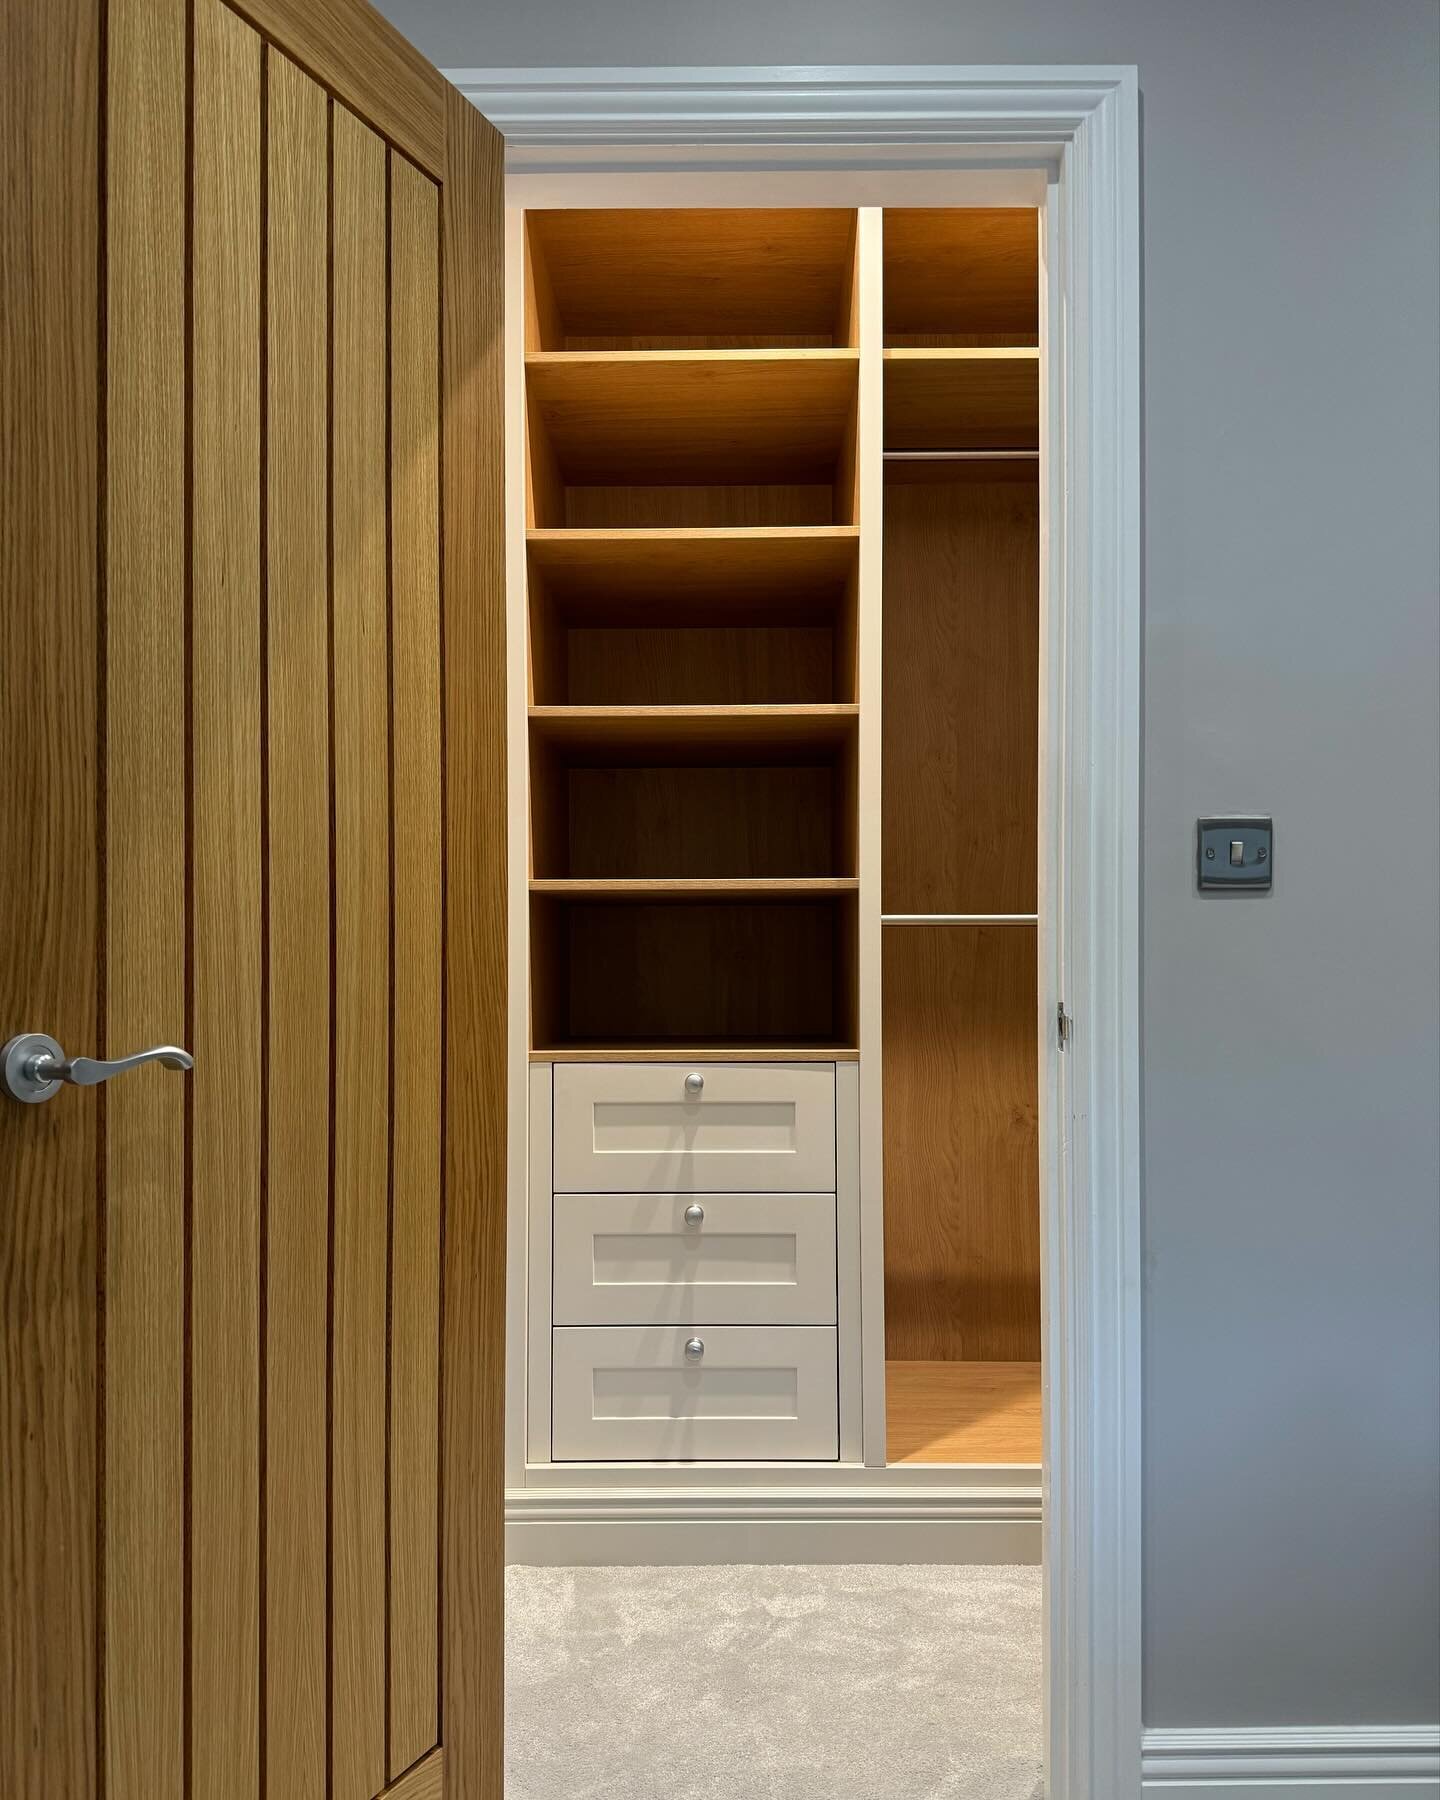 A nice little walk in wardrobe completed in Whitchurch this week. Consisting of 3 shaker style drawers and a pullout shoe drawer with a mix of short and long hanging.

Internals made in an @eggergroup &ldquo;Oiled Kendal Oak&rdquo; and externals made